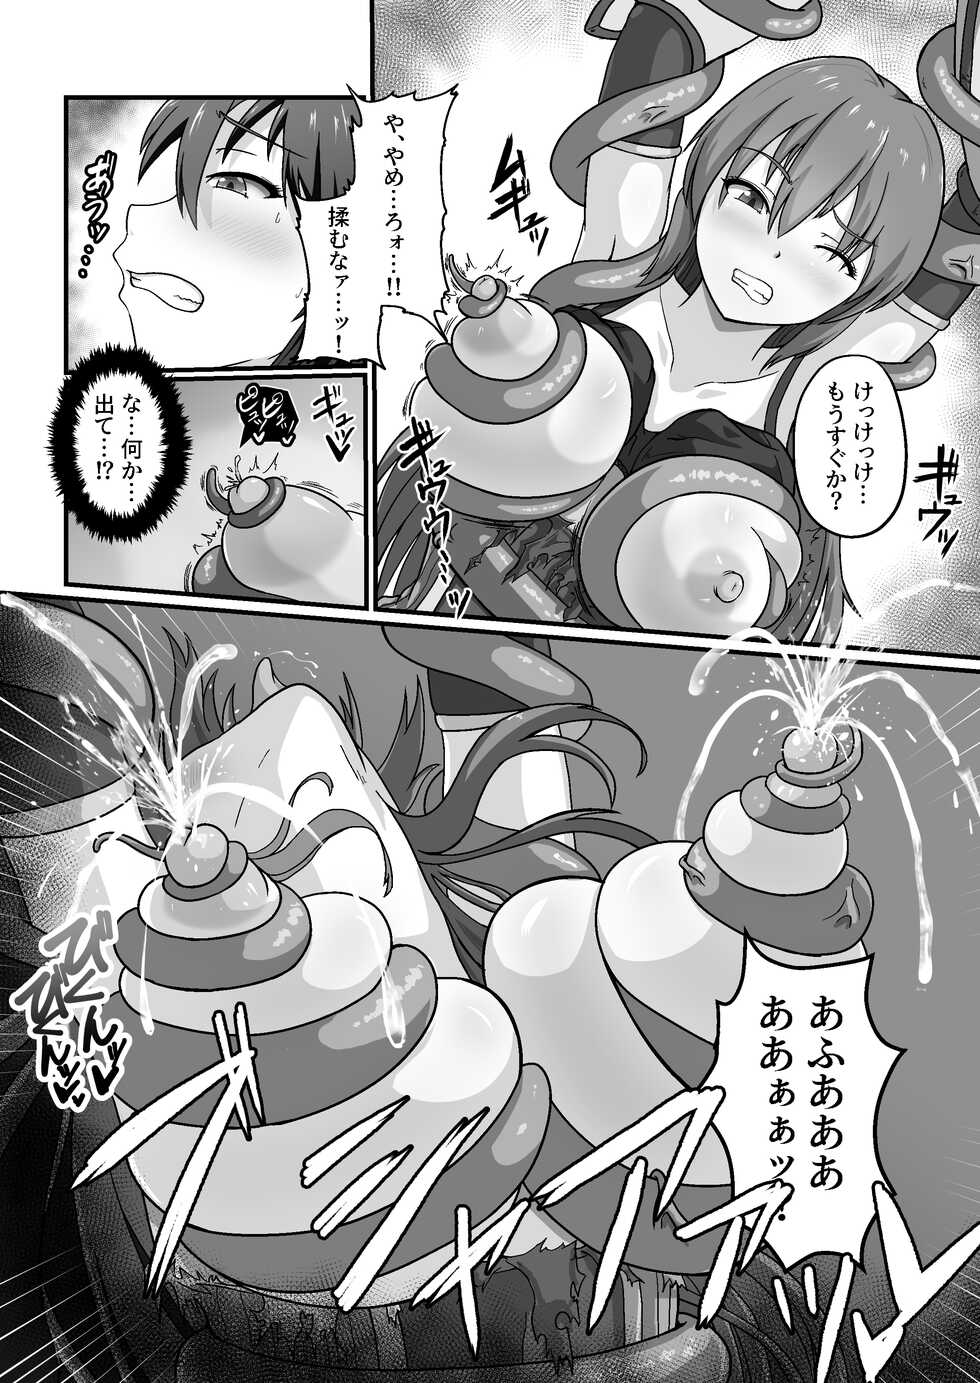 [k.y.k.y] 王国騎士は触手に搾乳されて絶頂する - Page 27